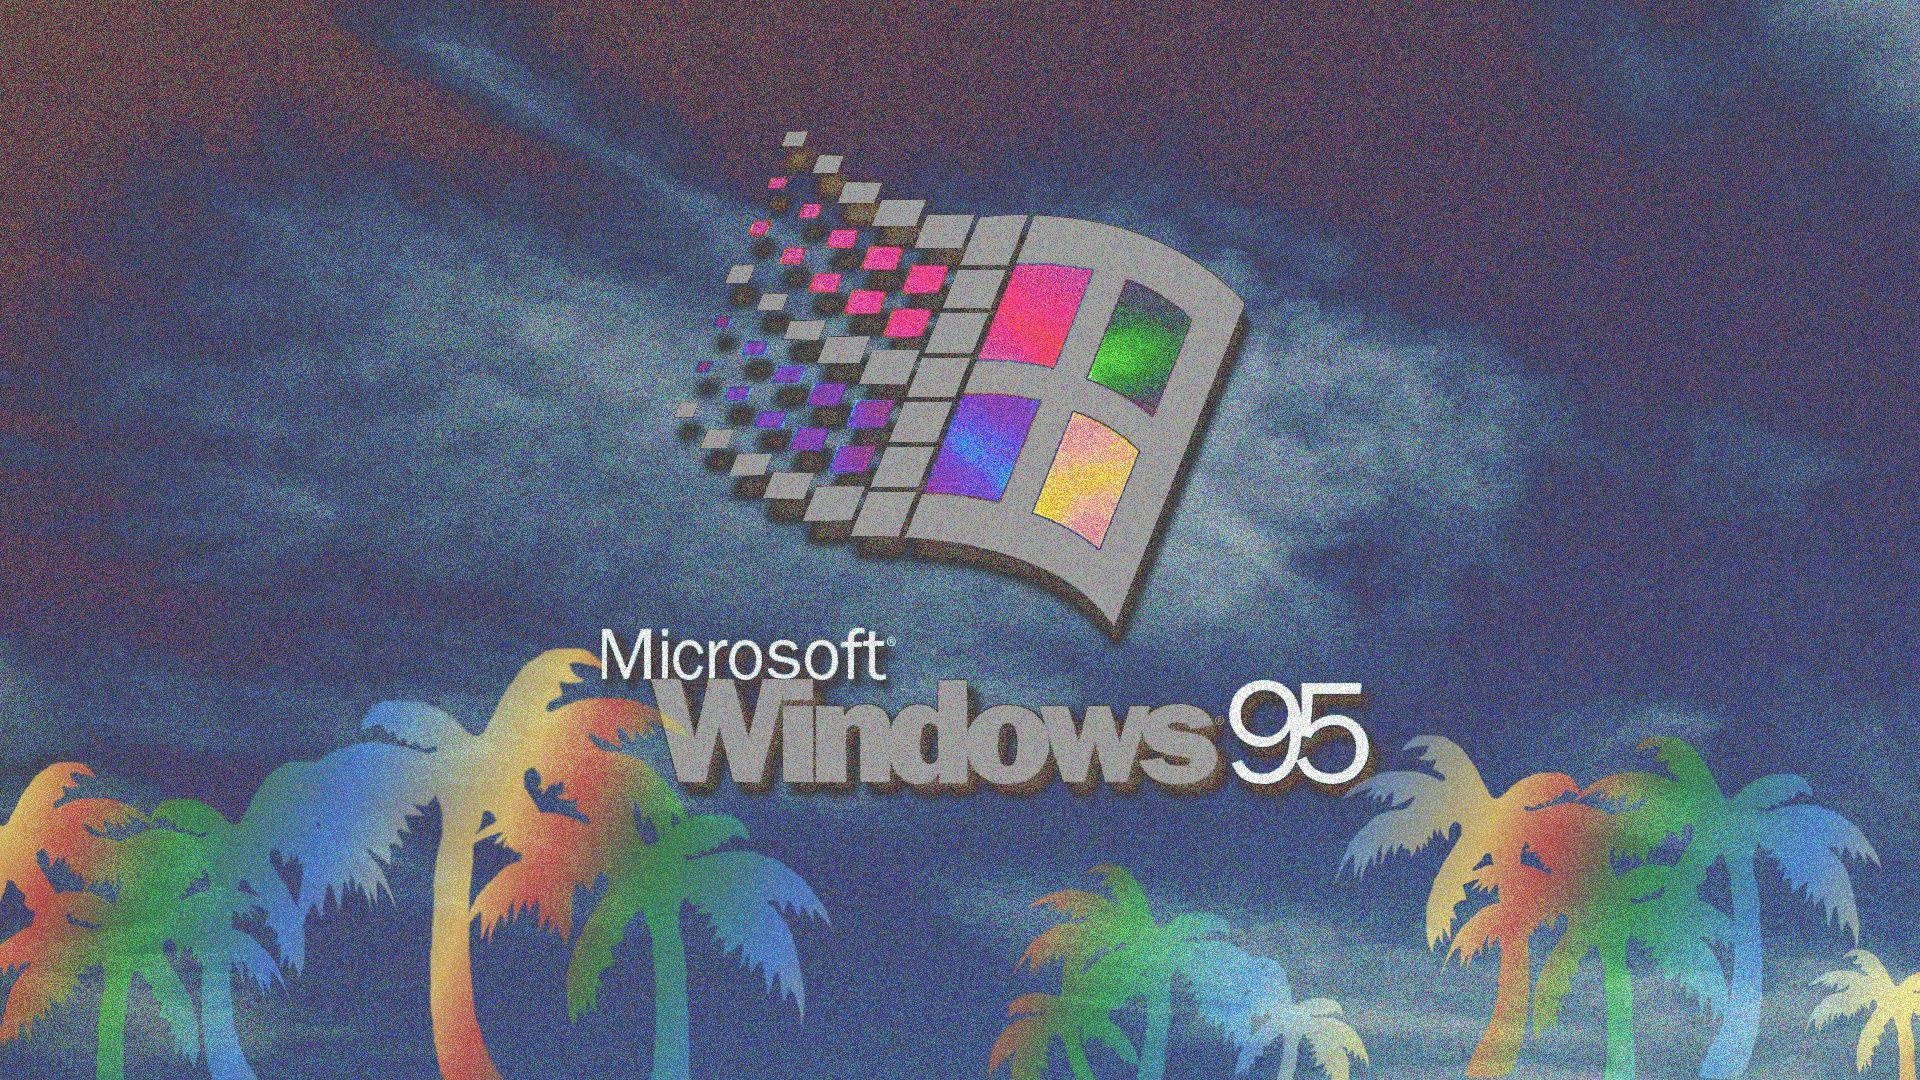 Explore the past with Windows 98 Wallpaper